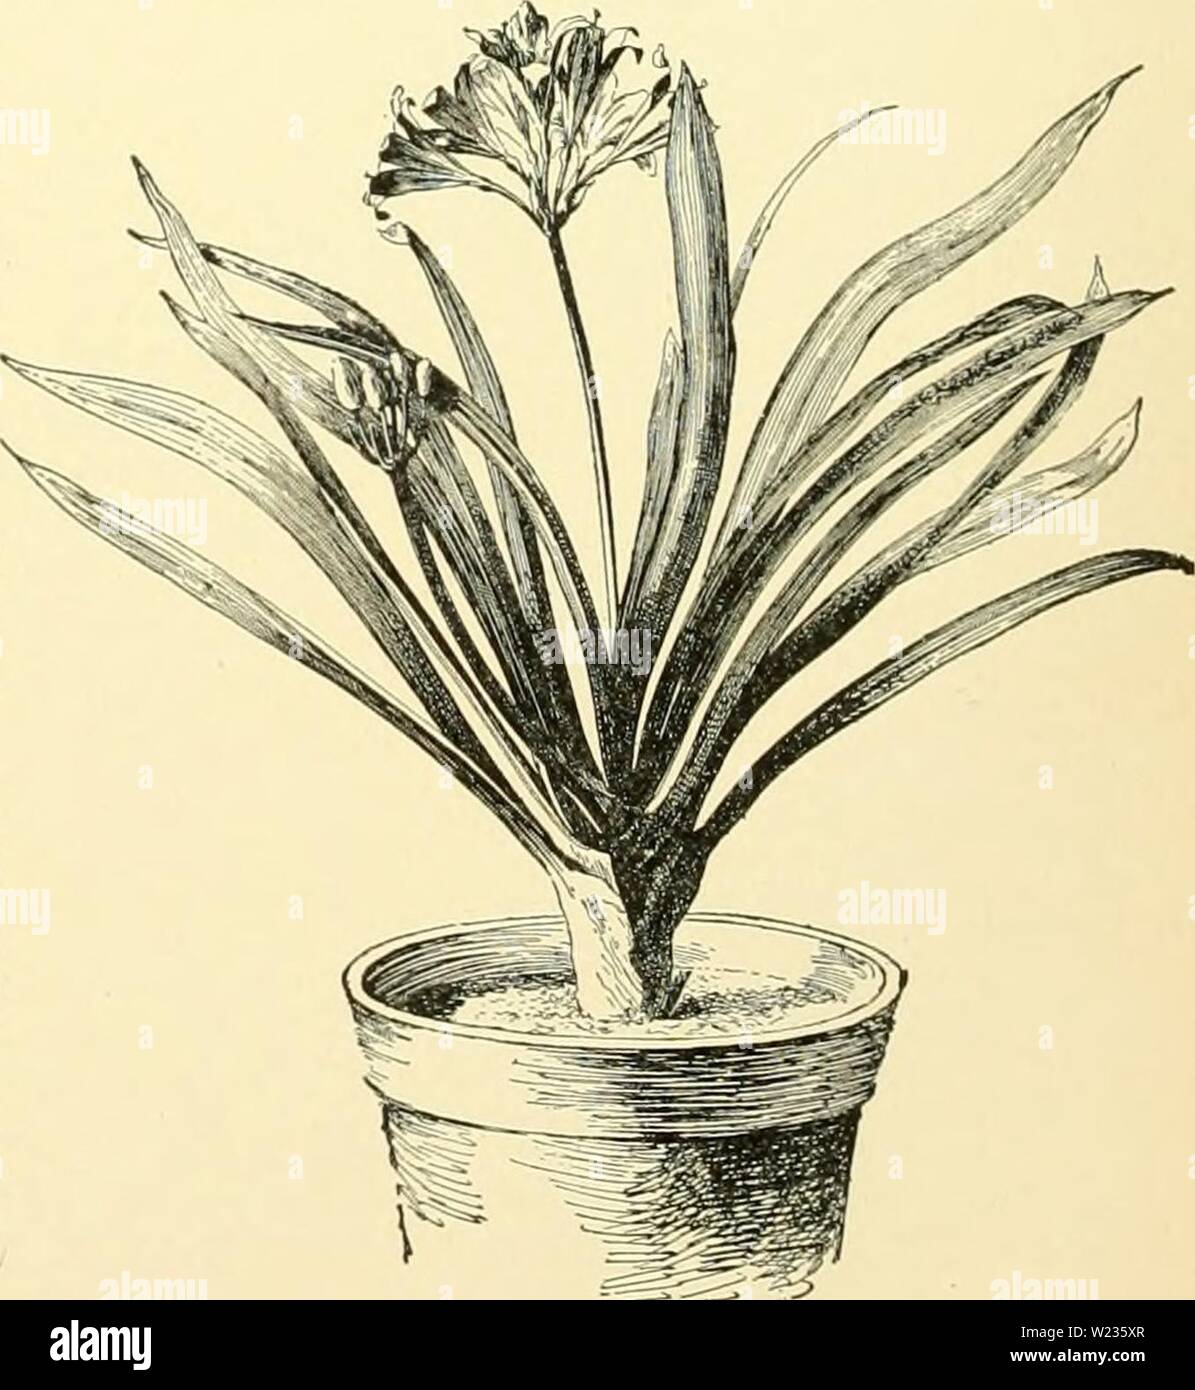 Archive image from page 137 of Cyclopedia of American horticulture, comprising. Cyclopedia of American horticulture, comprising suggestions for cultivation of horticultural plants, descriptions of the species of fruits, vegetables, flowers and ornamental plants sold in the United States and Canada, together with geographical and biographical sketches, and a synopsis of the vegetable kingdom  cyclopediaofamer02bail Year: 1906  336 CLIDEMIA John Saul, has large, oval, pointed Ivs. with 5 strong ner-es, and a narrow band of white down each side of the midrib. I.H. 22:219. R.H. 1876, p. 23:i. CLI Stock Photo